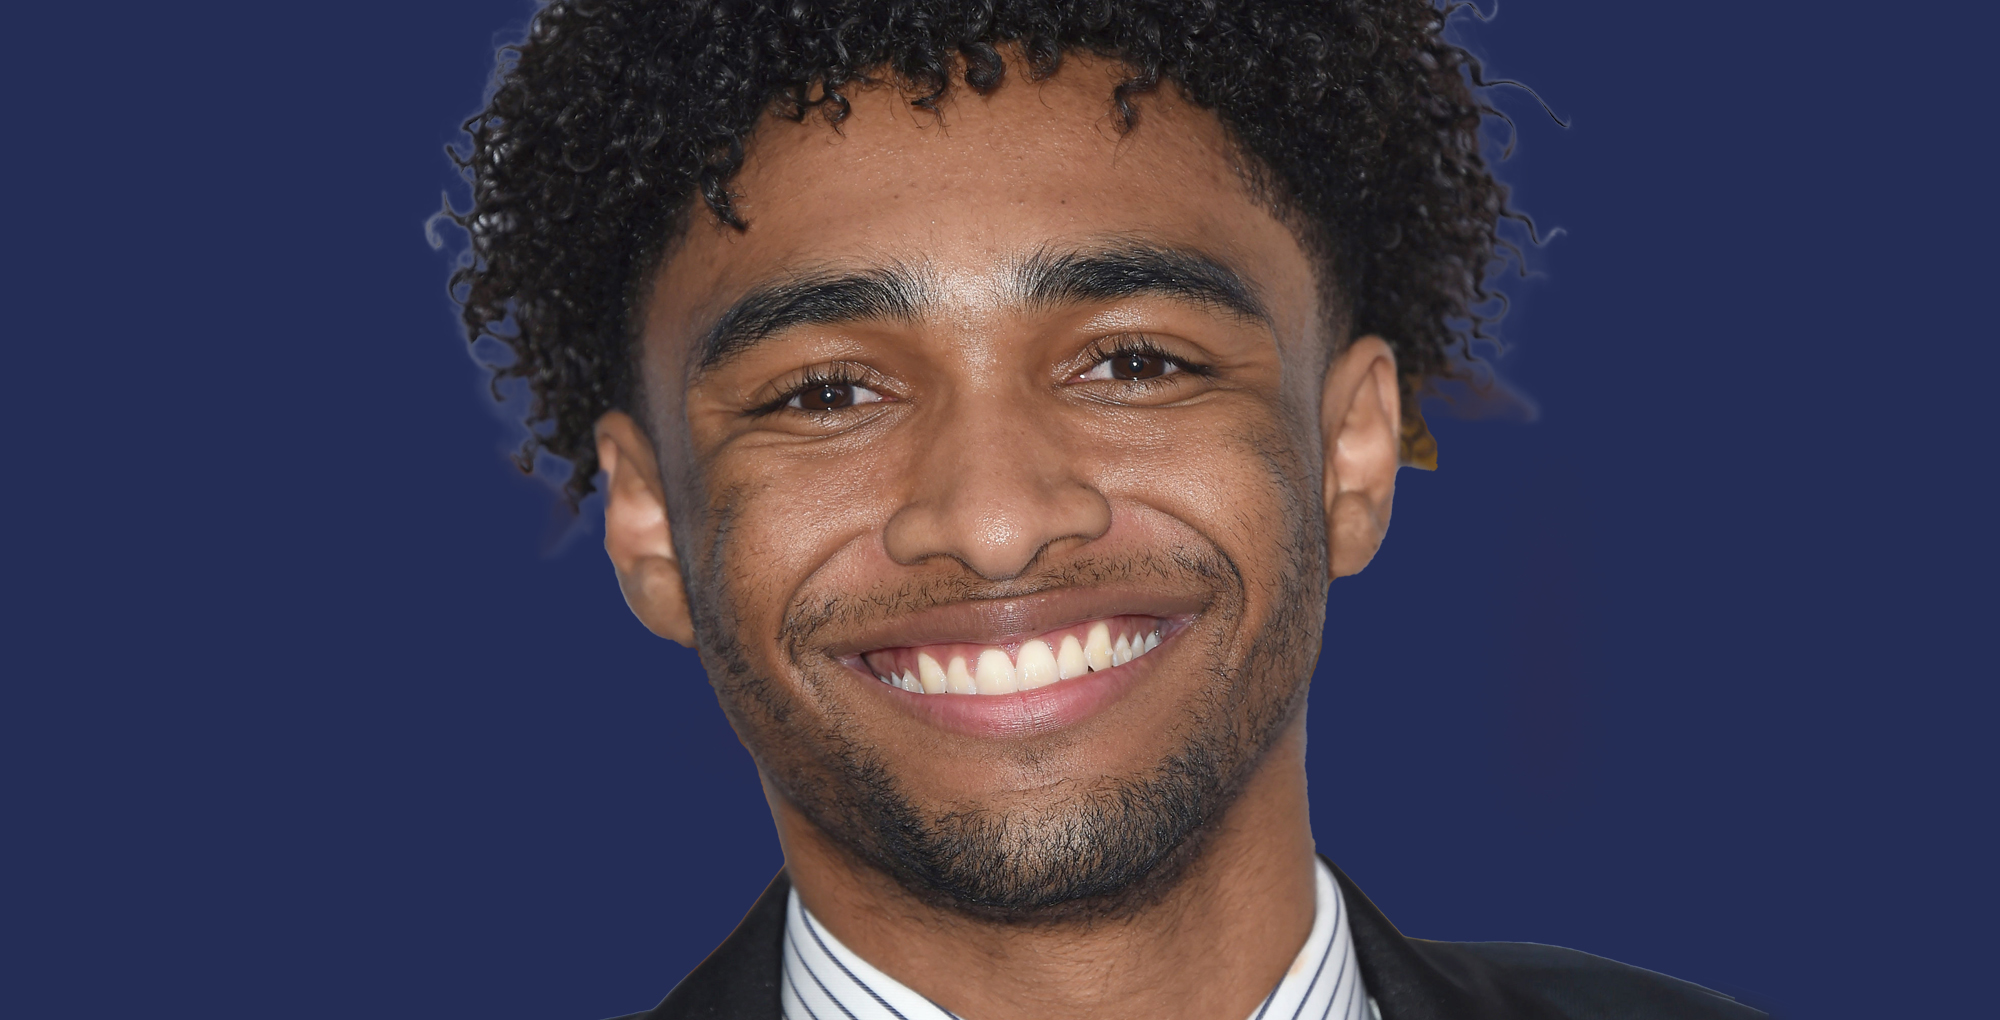 jacob aaron gaines played moses winters on young and the restless.